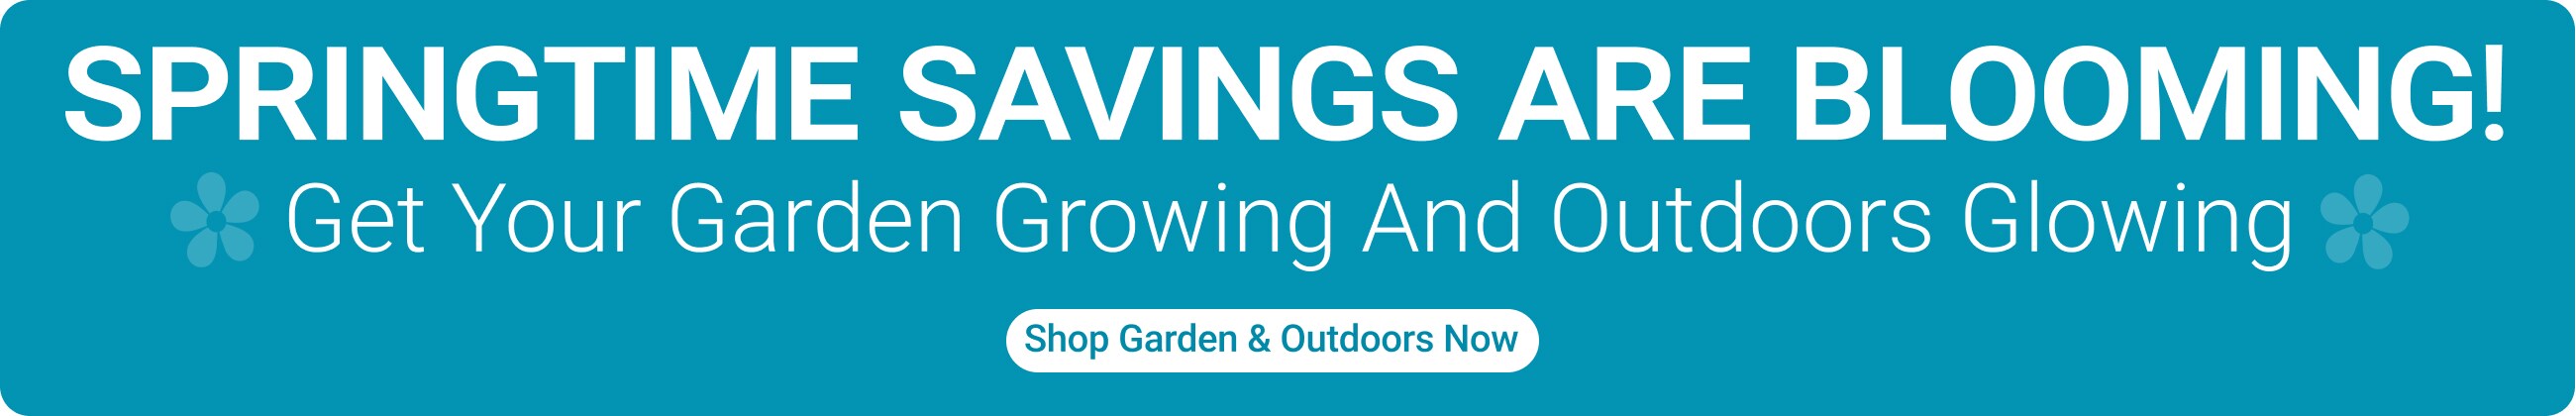 Springtime Savings Are Blooming - Shop Now!